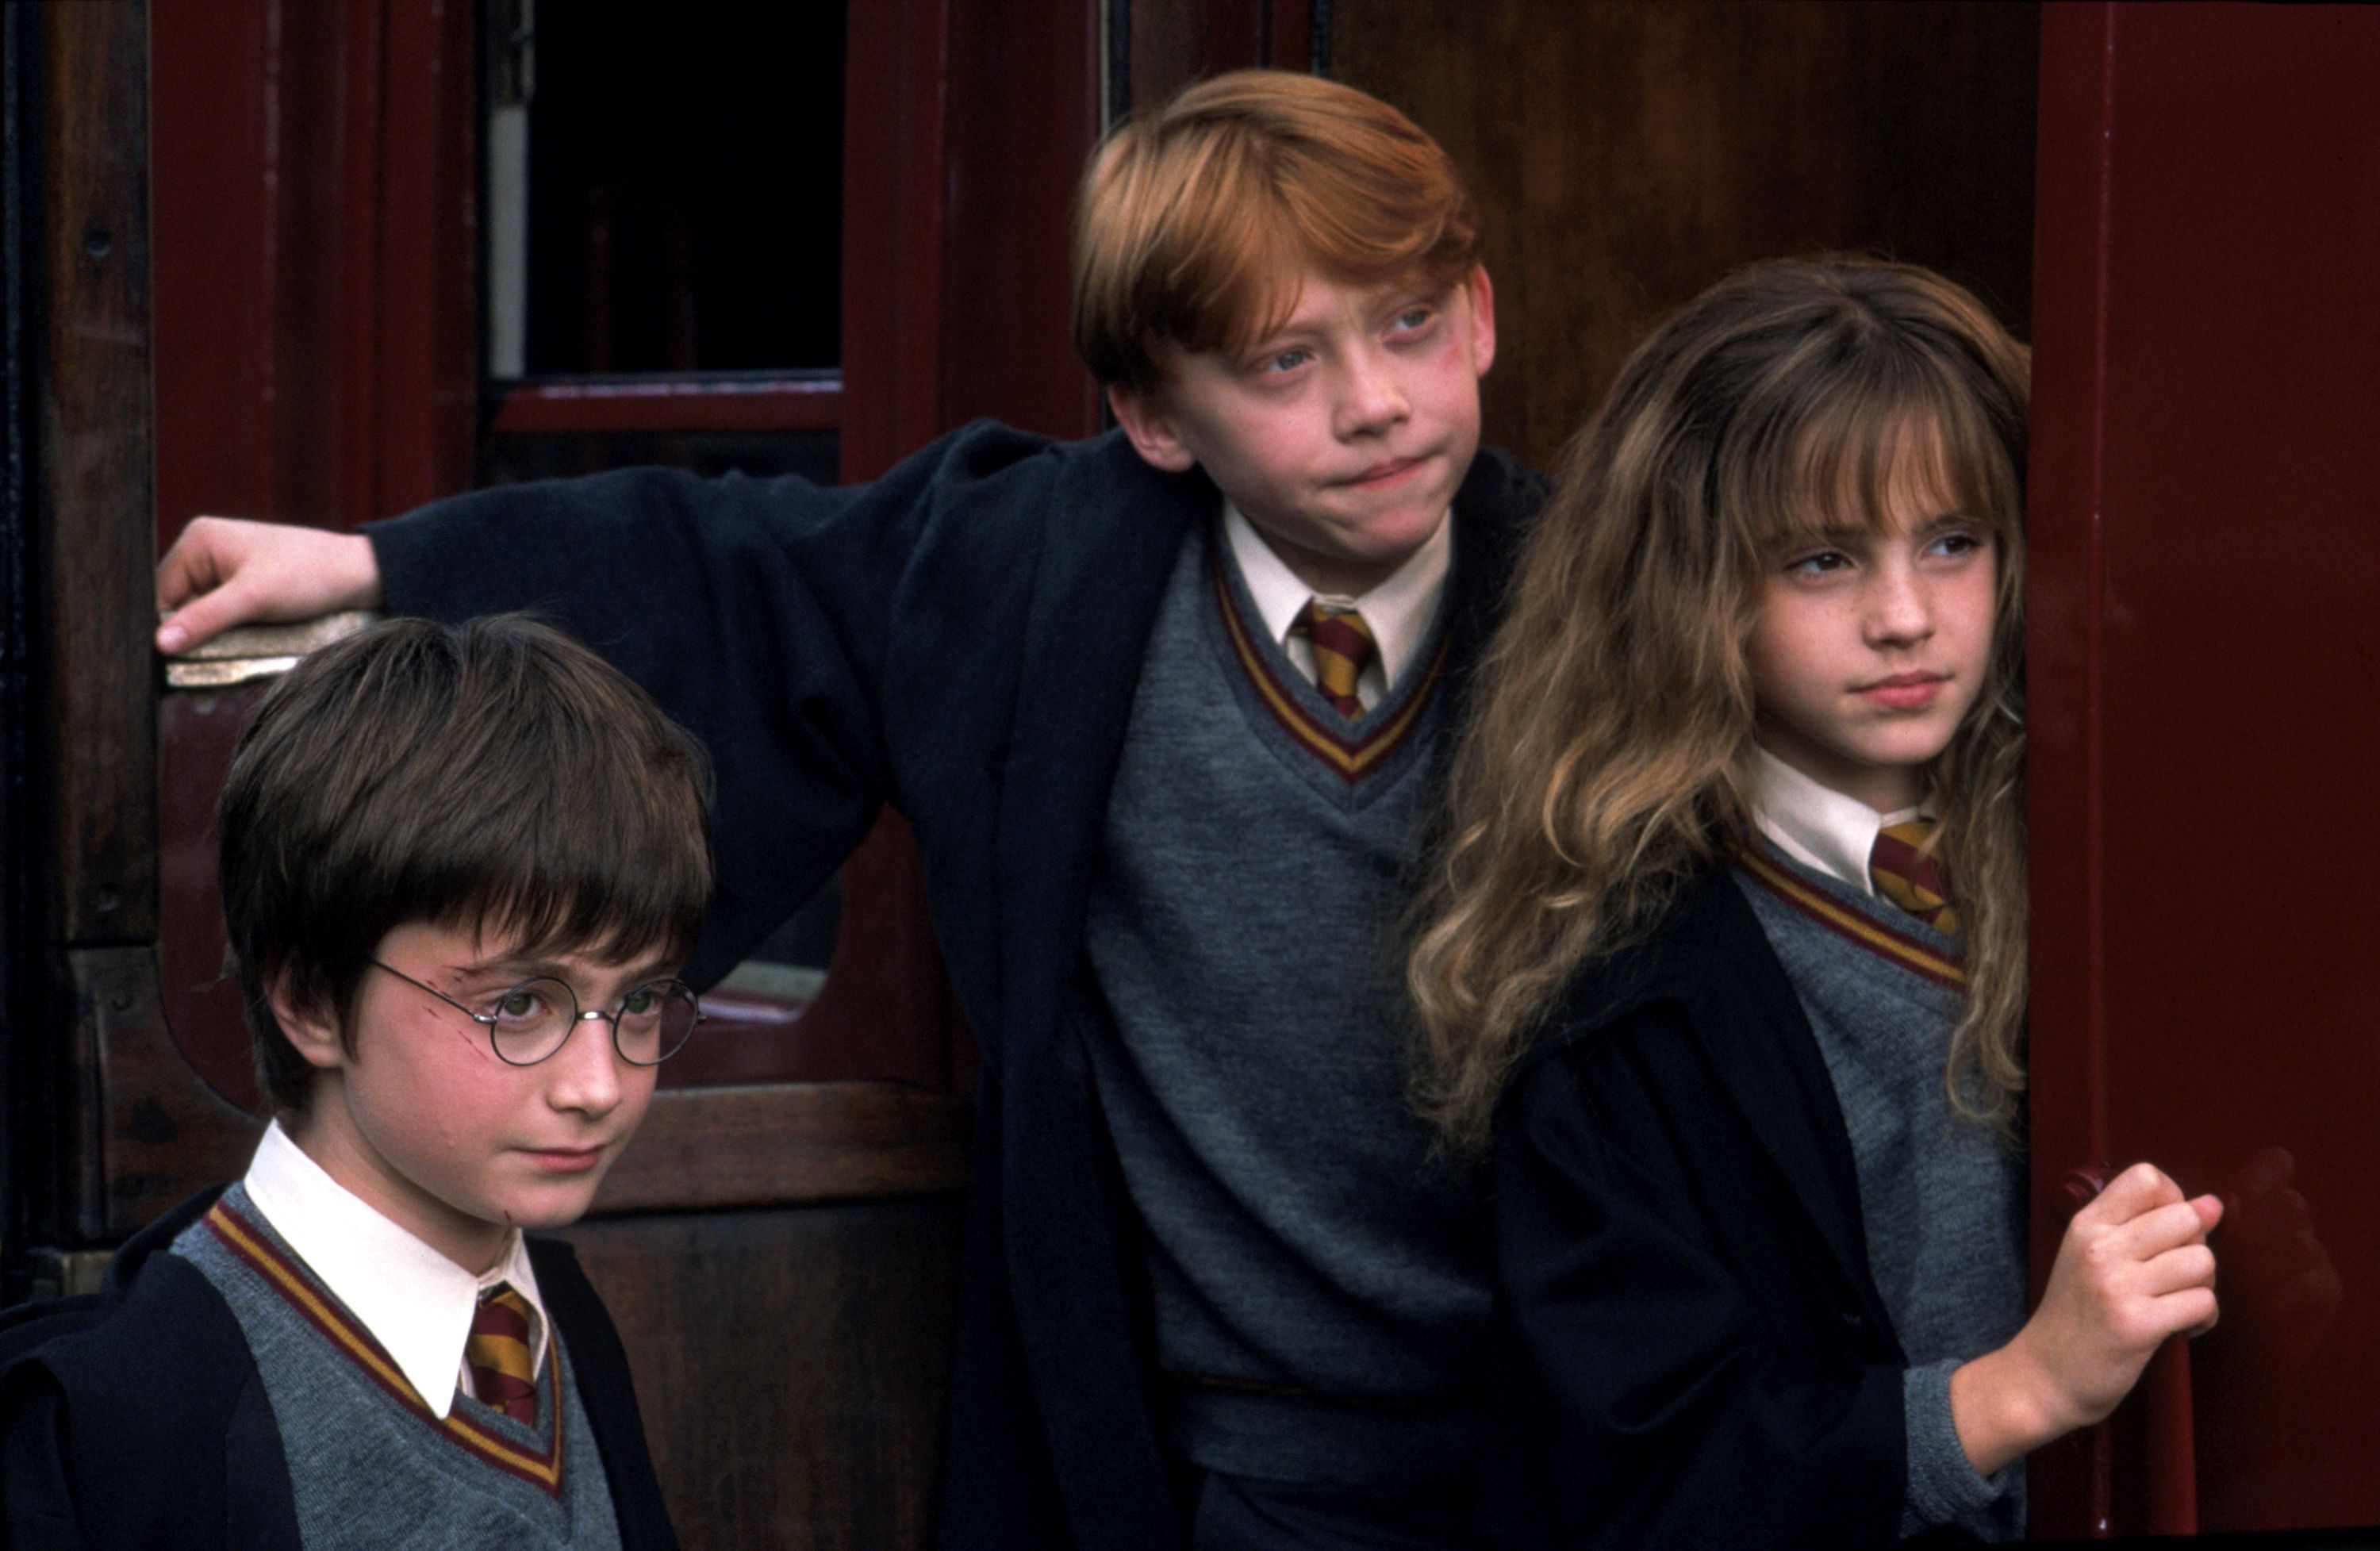 JK Rowling says Hermione should have married Harry Potter, not Ron | CNN